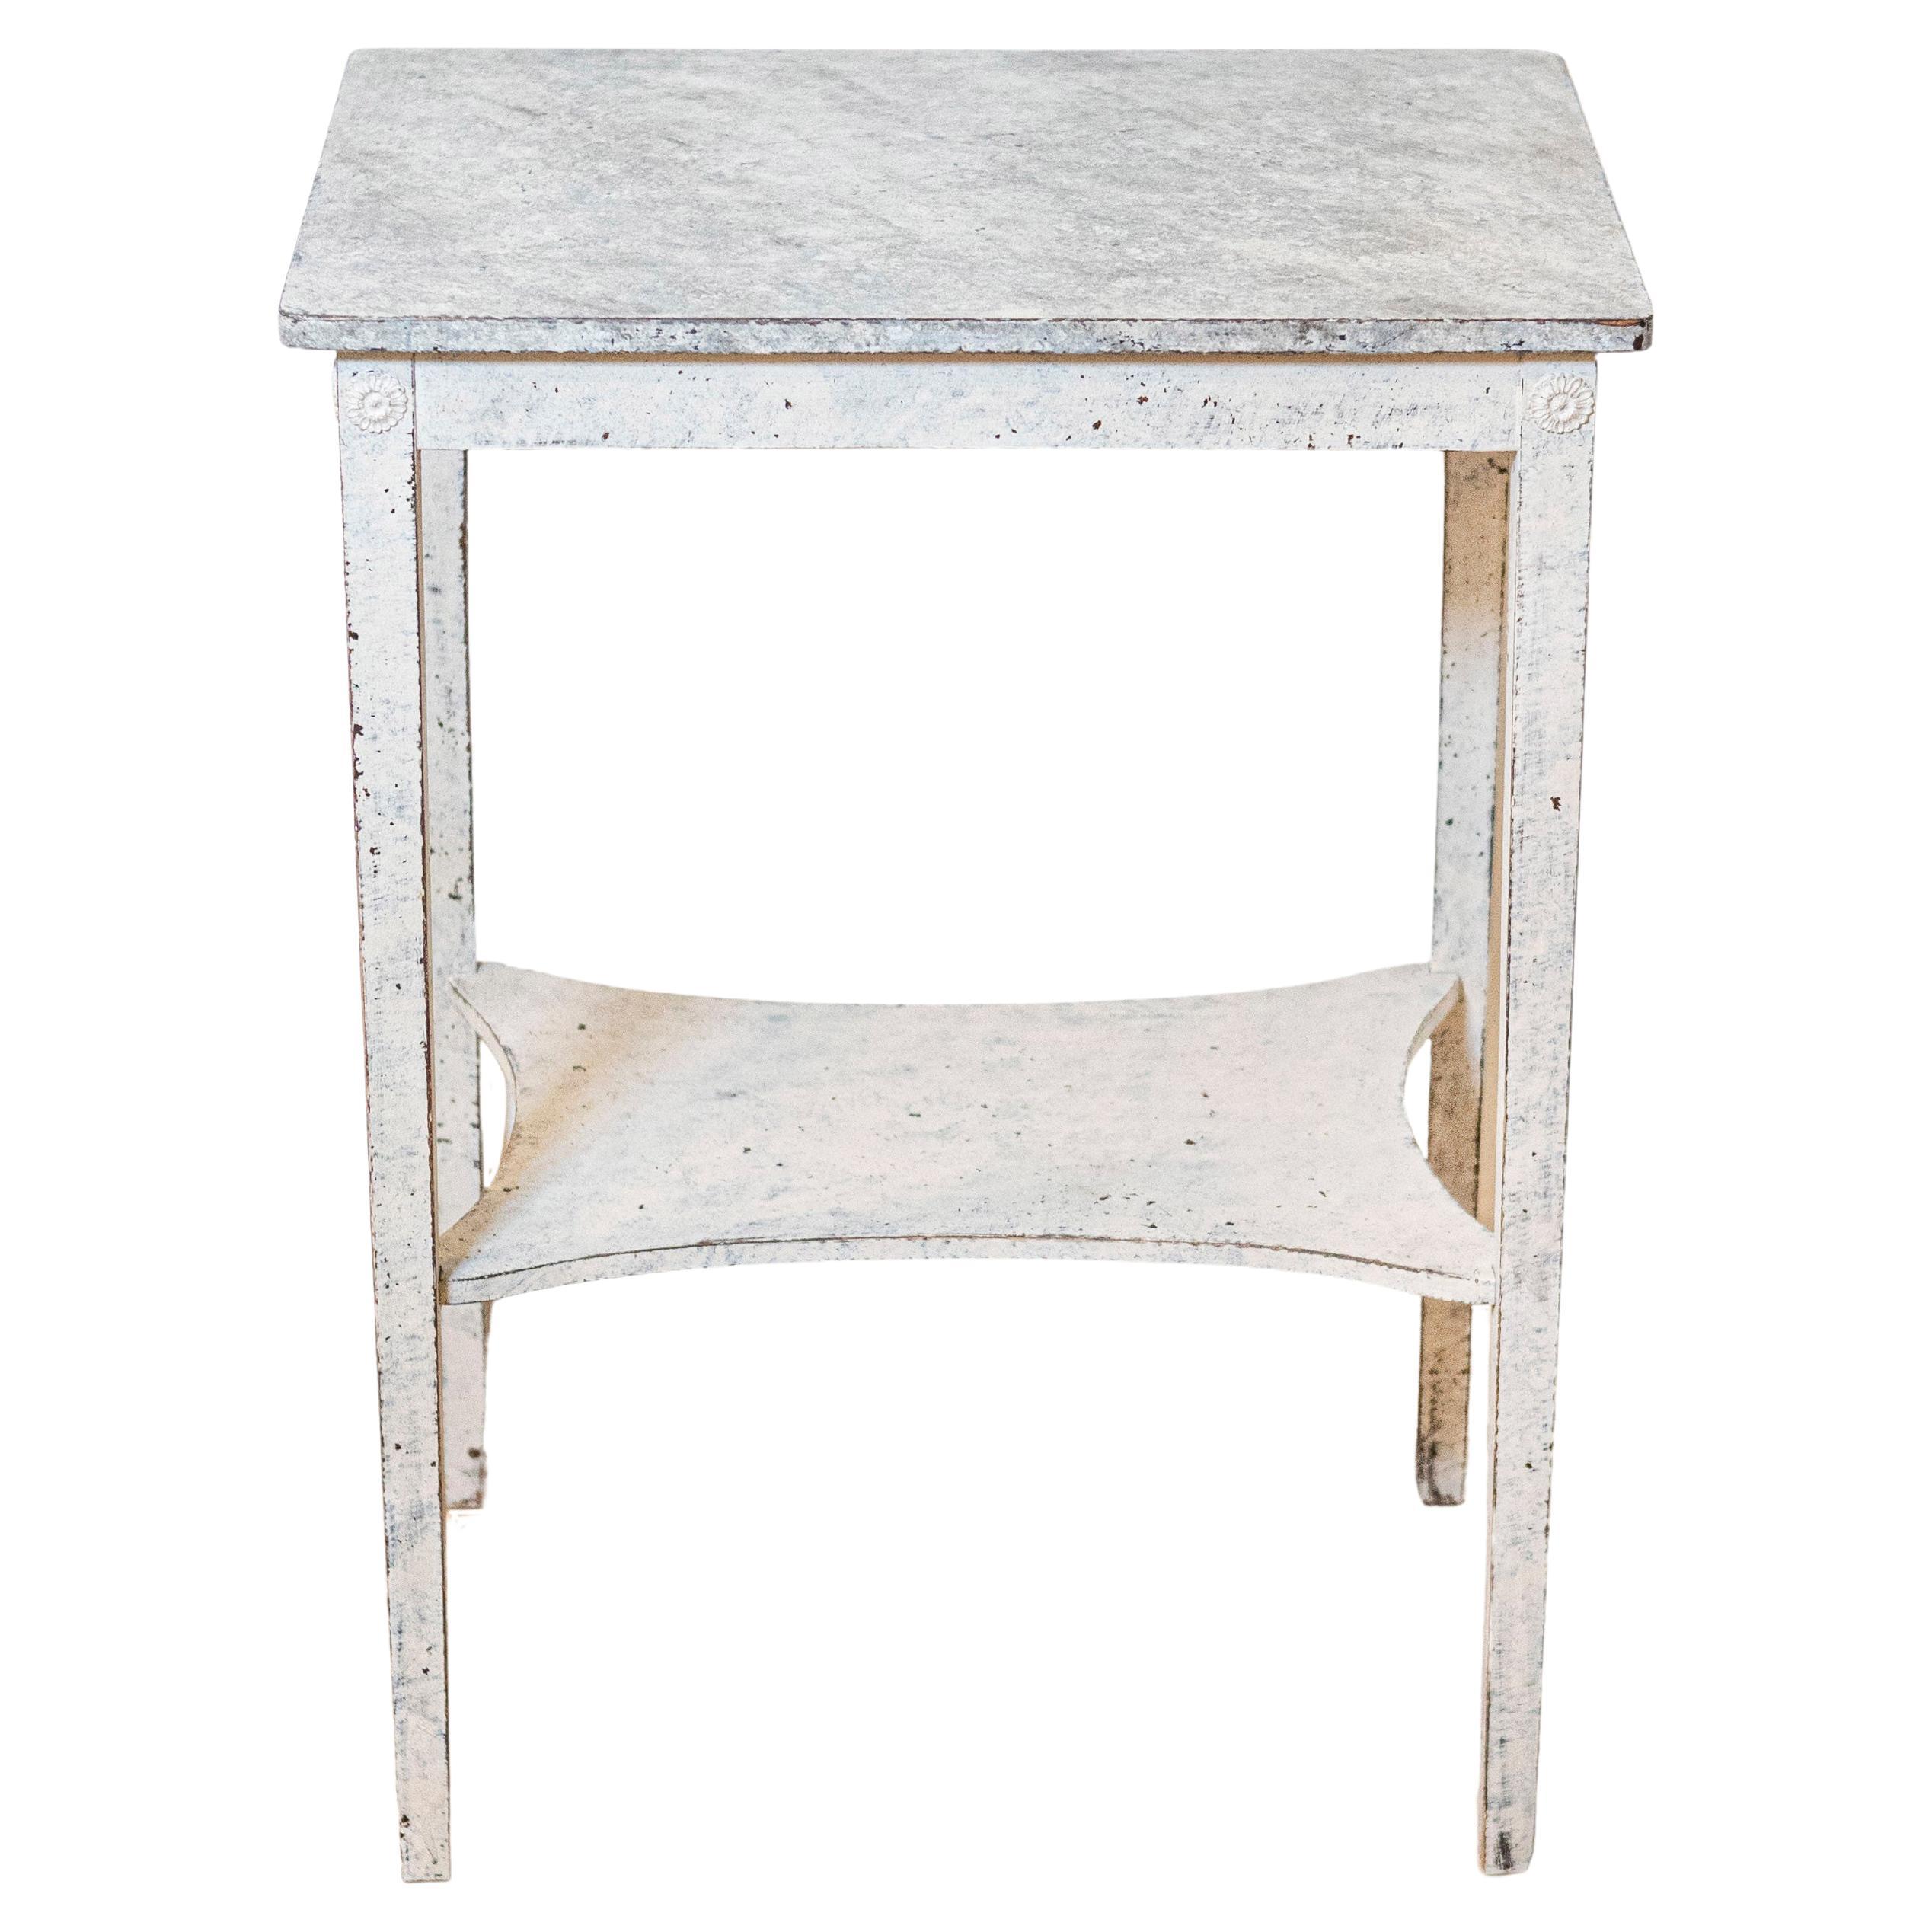 Swedish 19th Century Painted Side Table with Marbleized Top and In-Curving Shelf